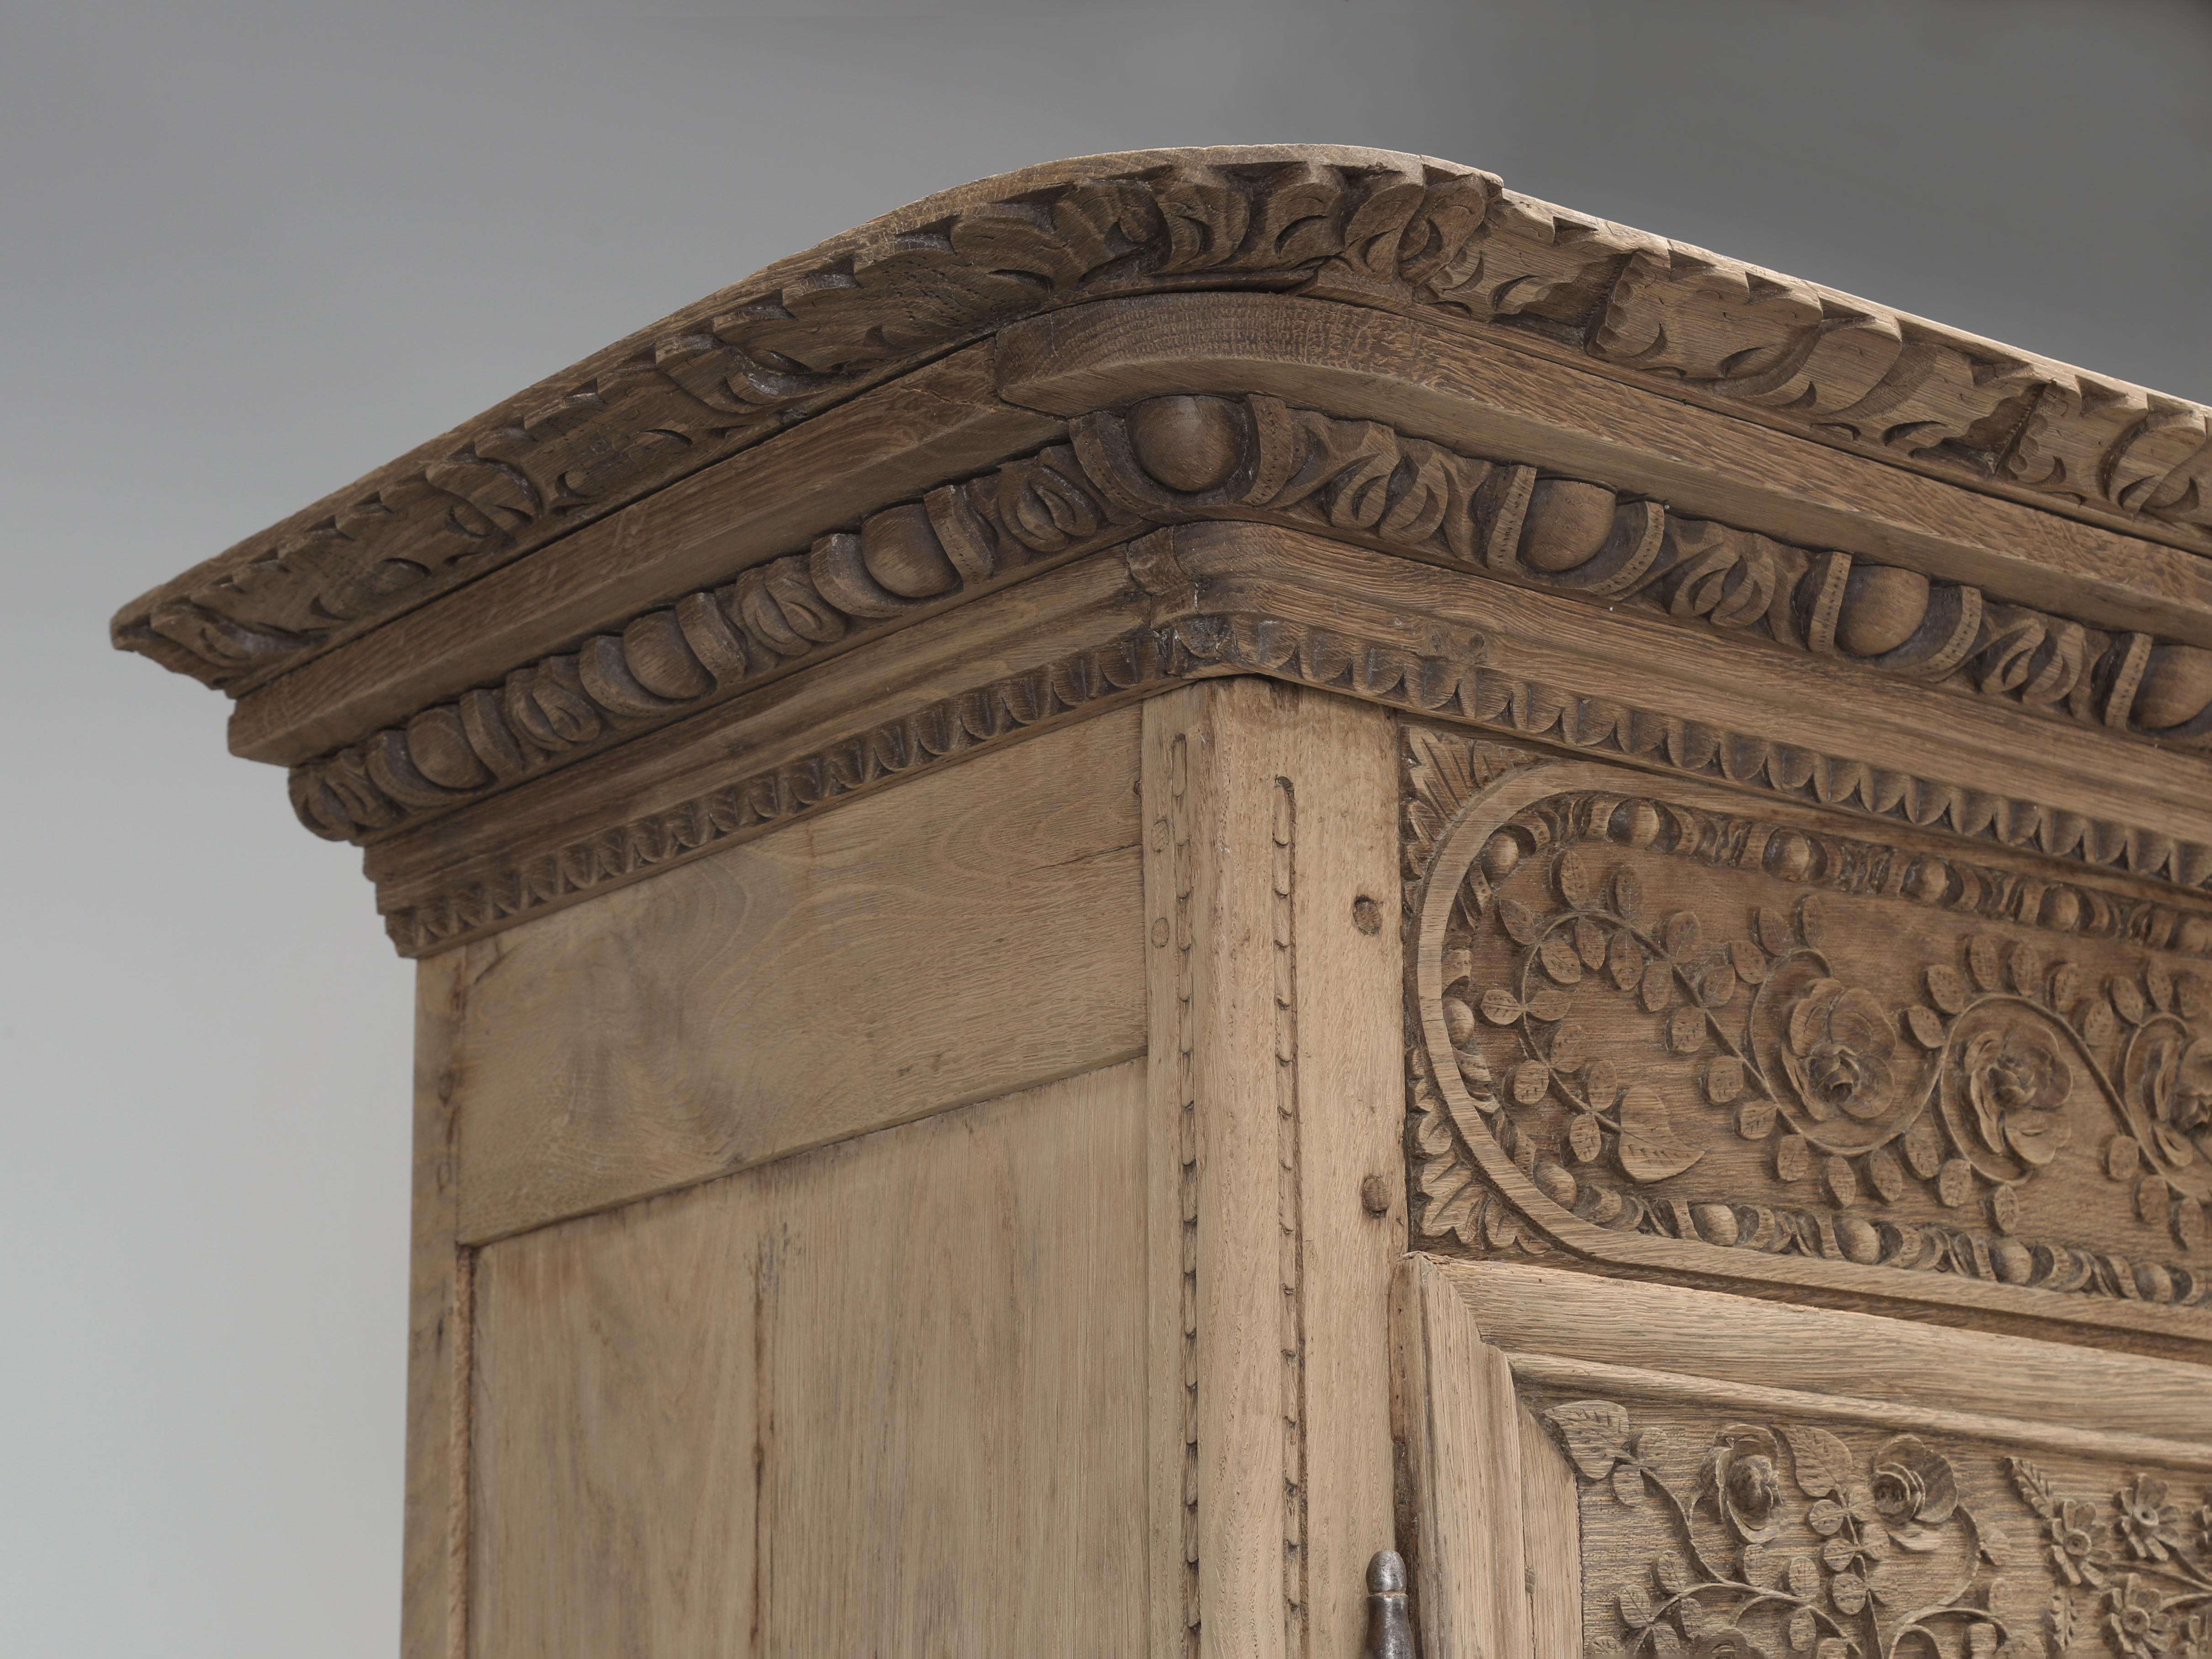 Hand-Carved Antique French Oak Armoire from Normandy Region of France Unrestored Original